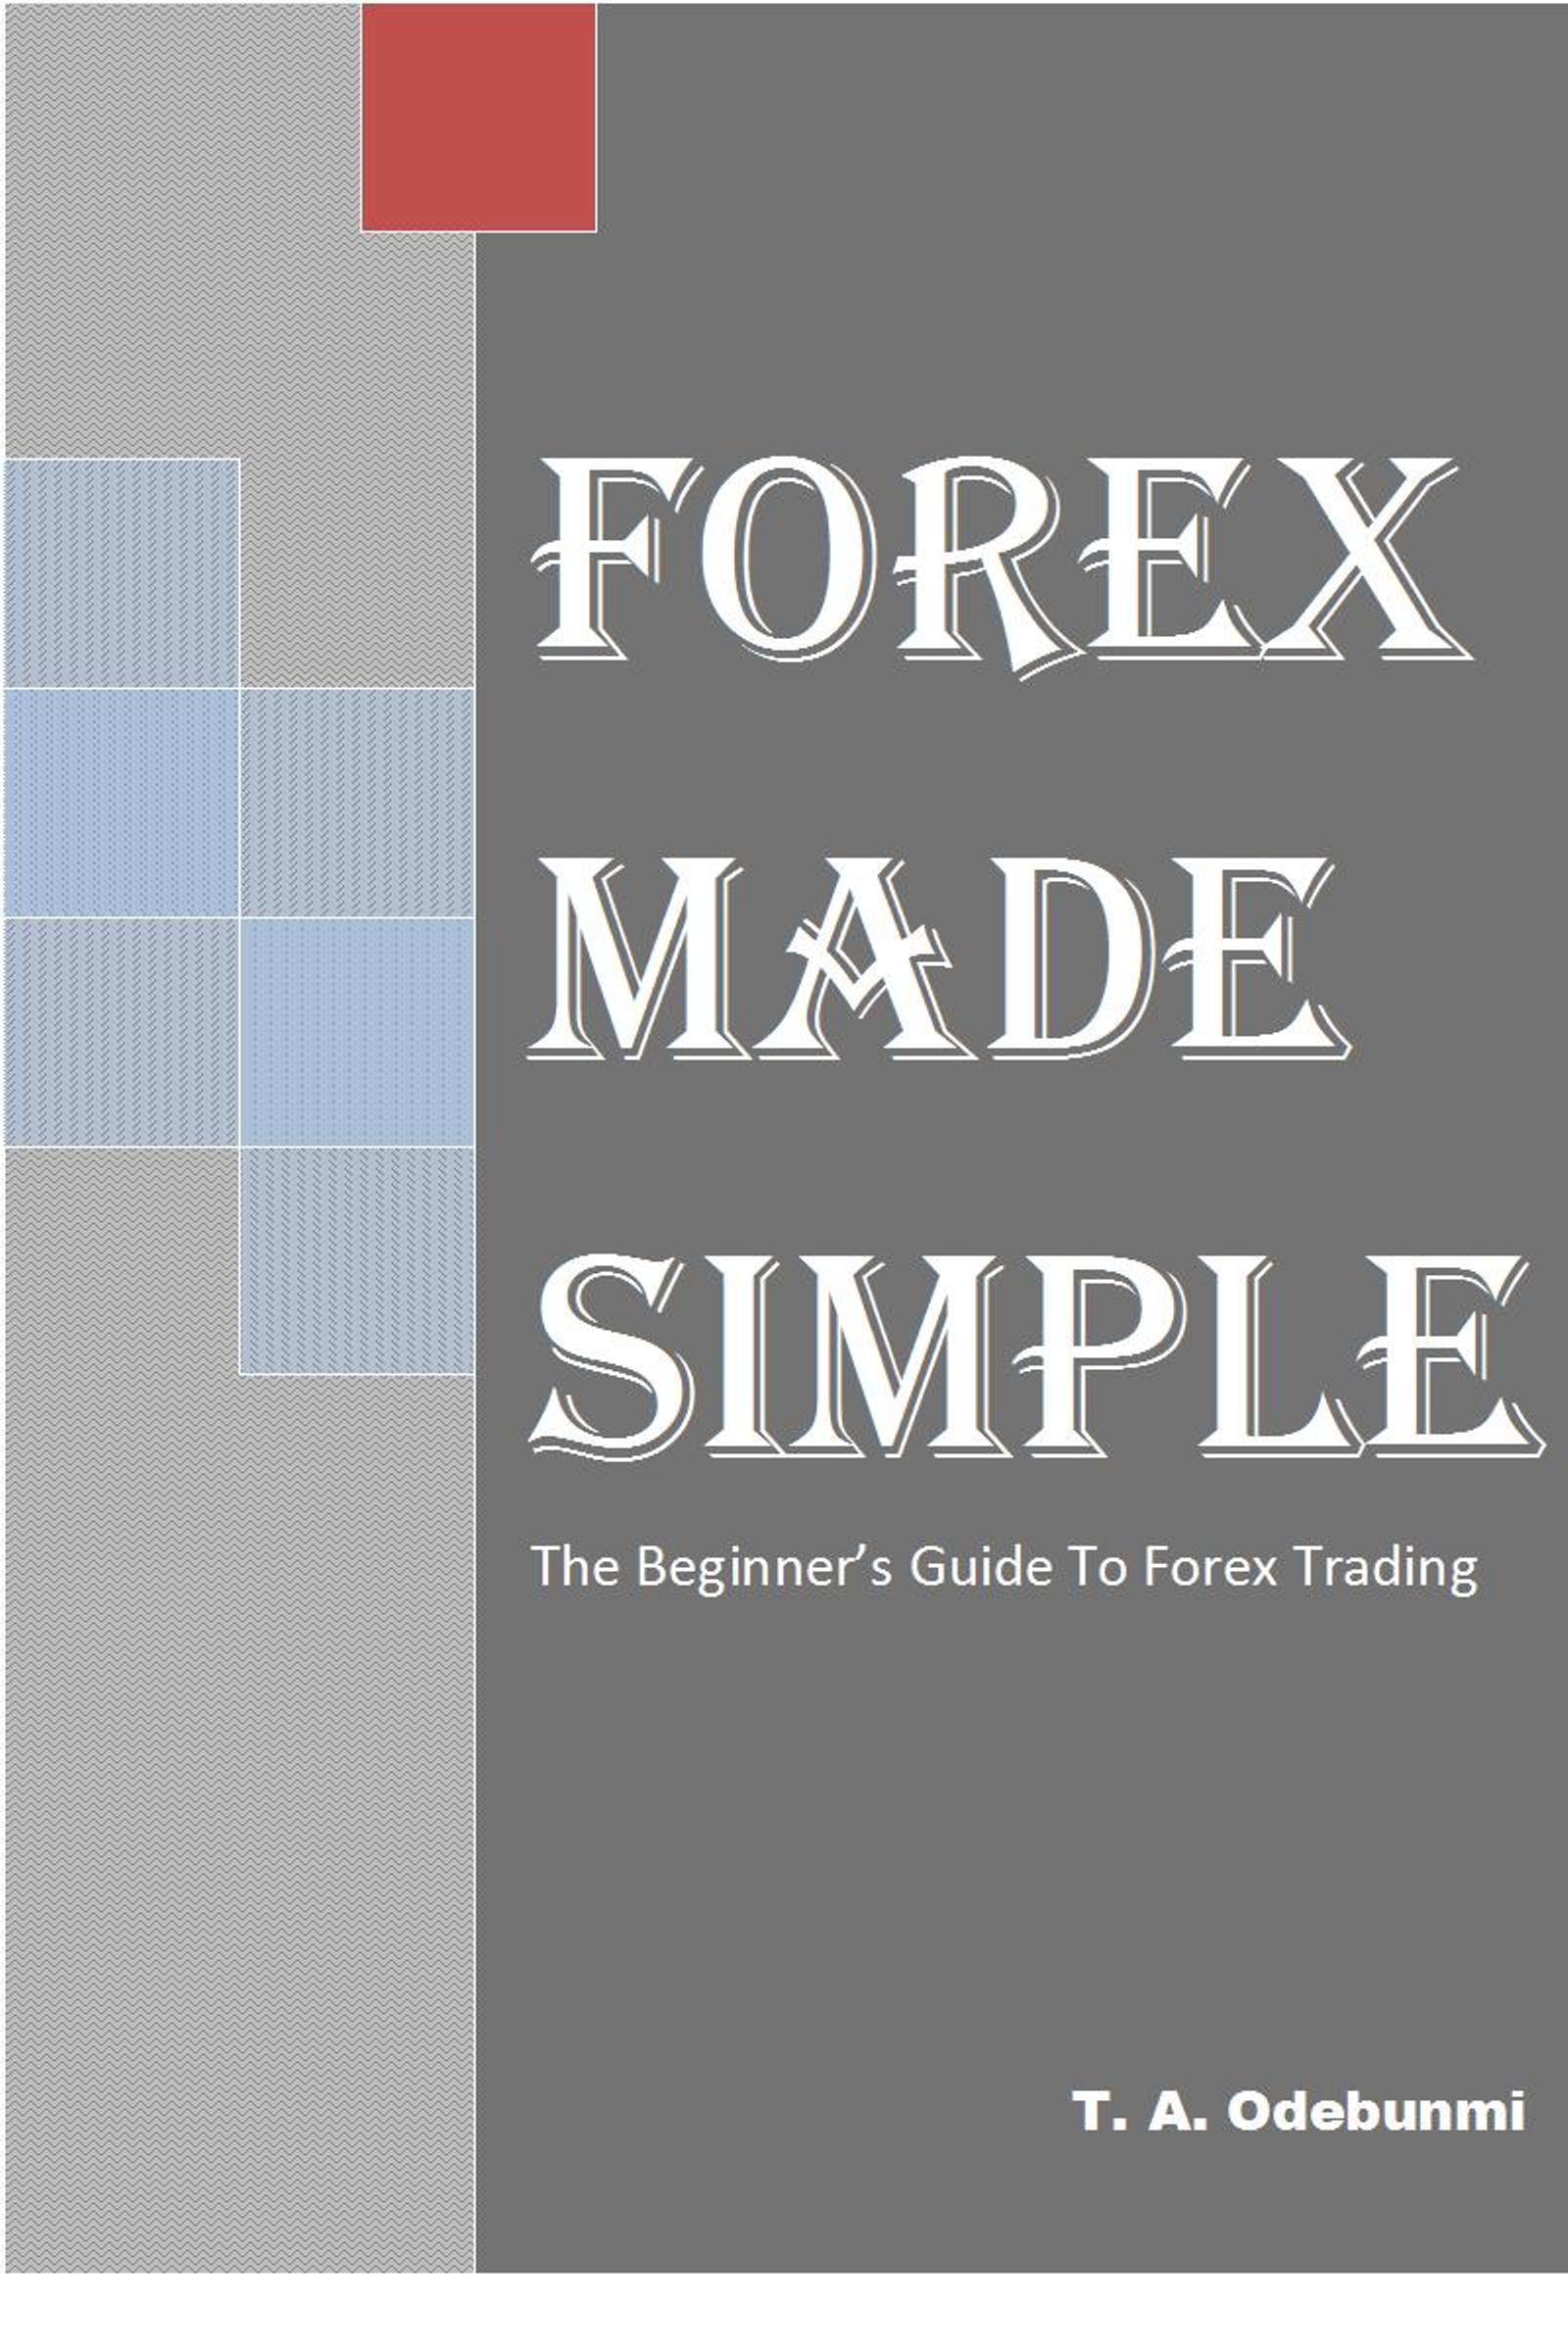 Forex Made Simple The Beginners Guide To Online Forex Trading An Ebook By Tolulope A Odebunmi - 